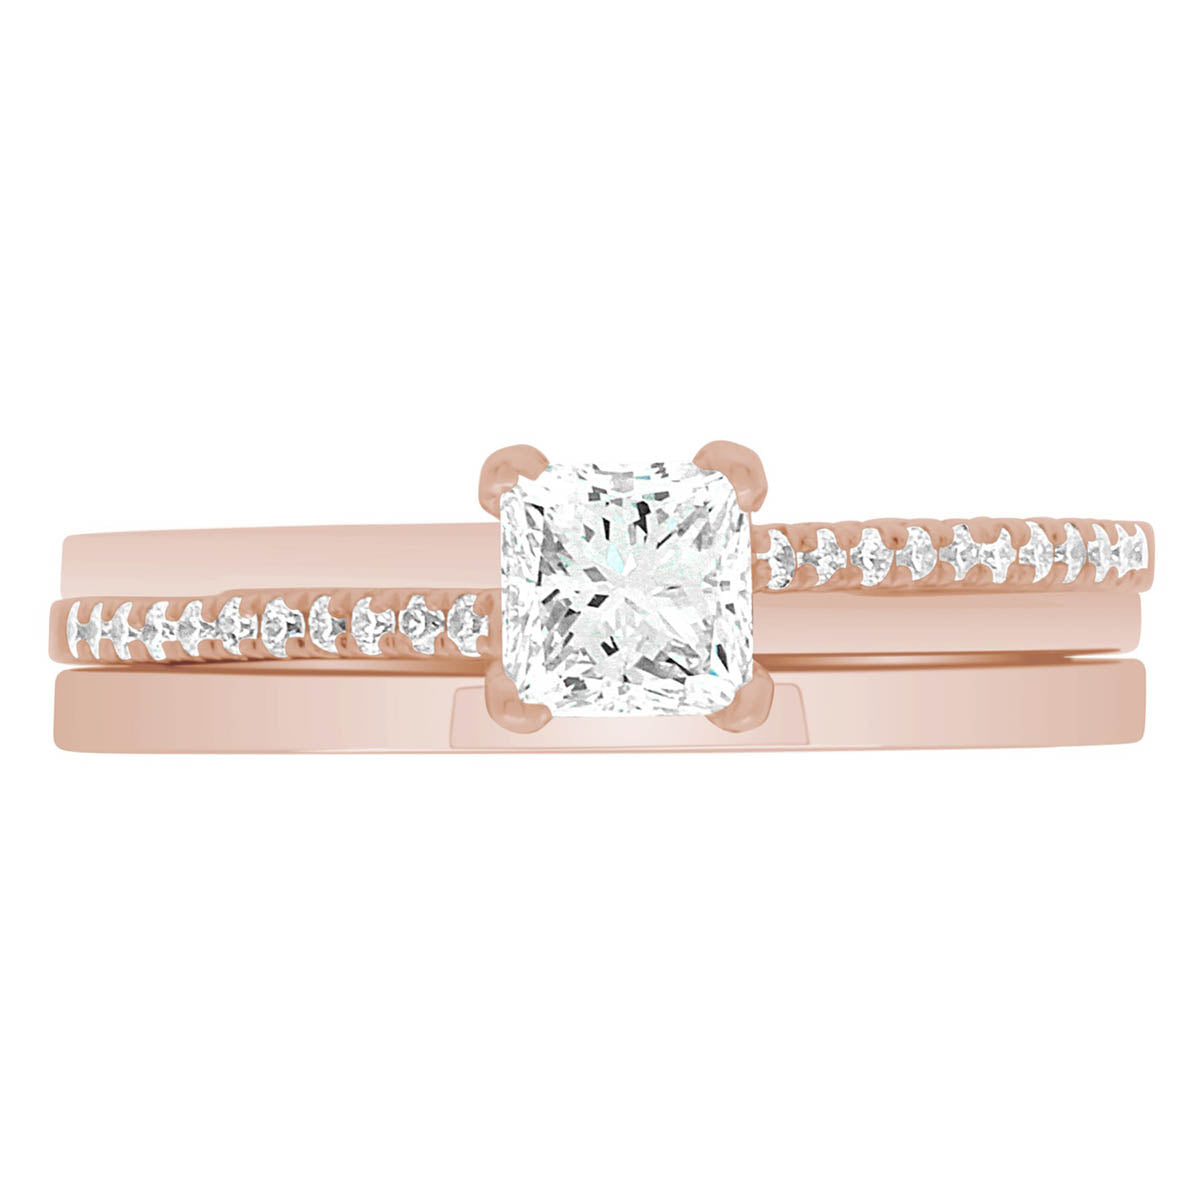 Promise Ring Style made from rose gold pictured with a plain wedding ring